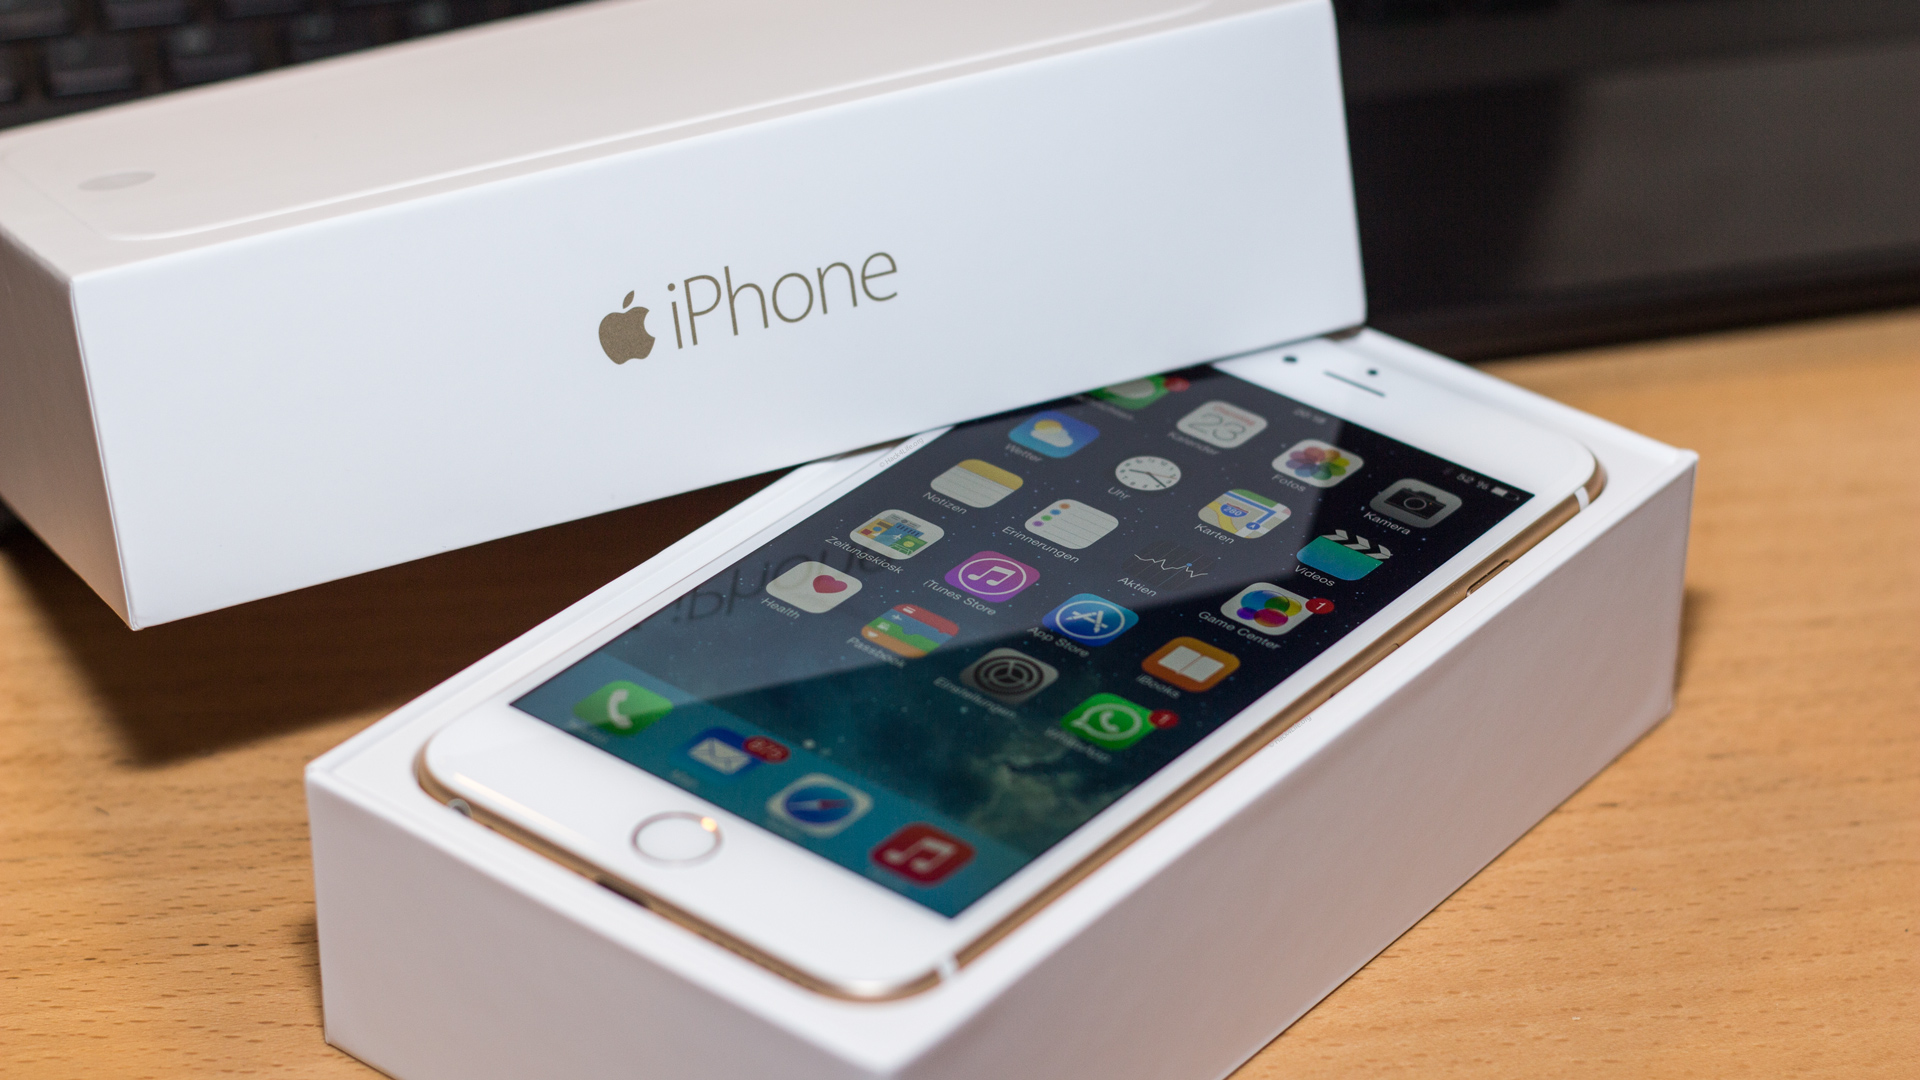 iPhone 6 Plus Review: Bendgate, Meinung, SlowMotion Tests, iOS 8